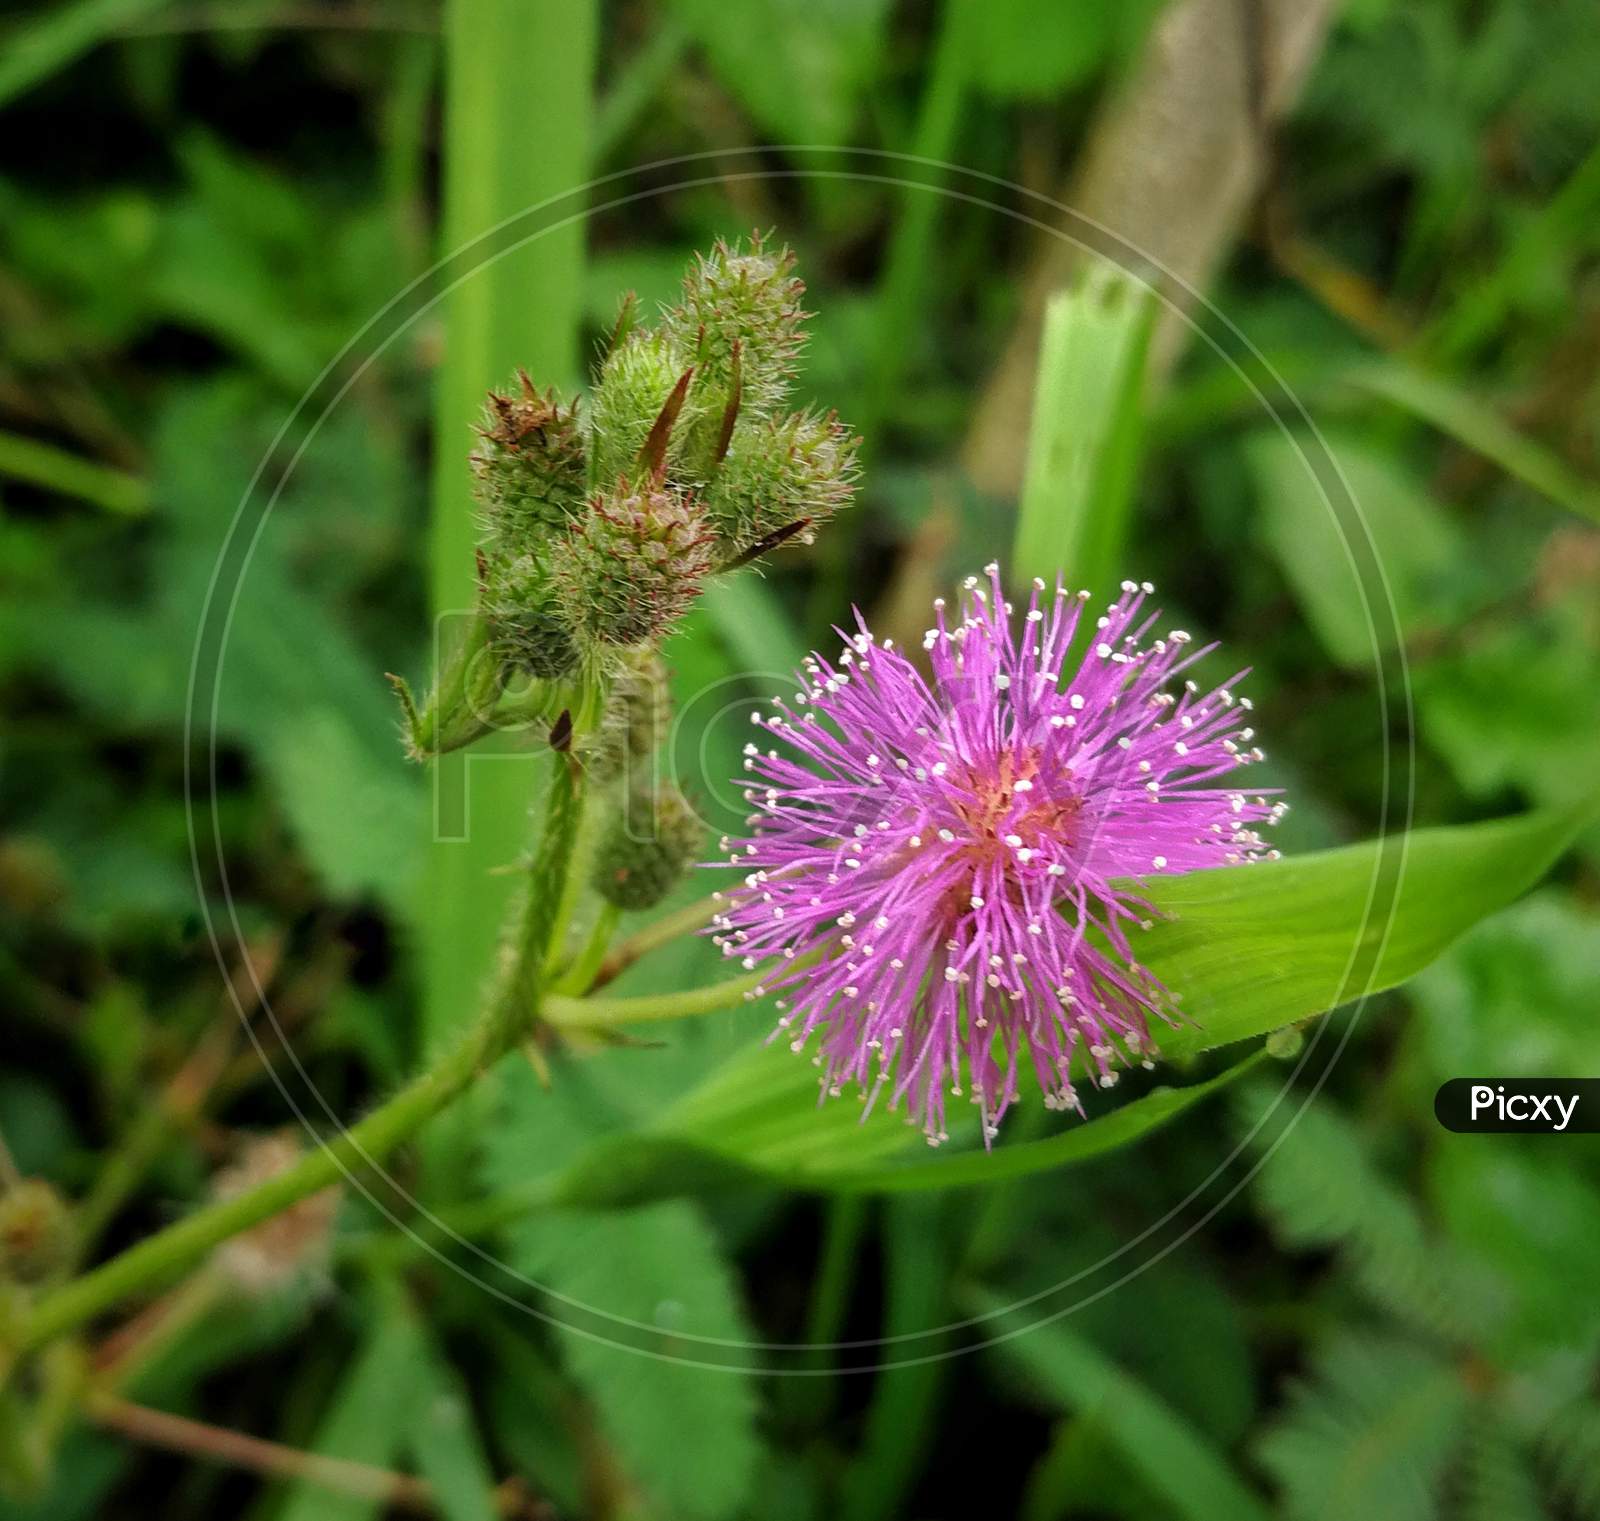 Flower of mimosa pudica(touch me not) plant in the rainy season